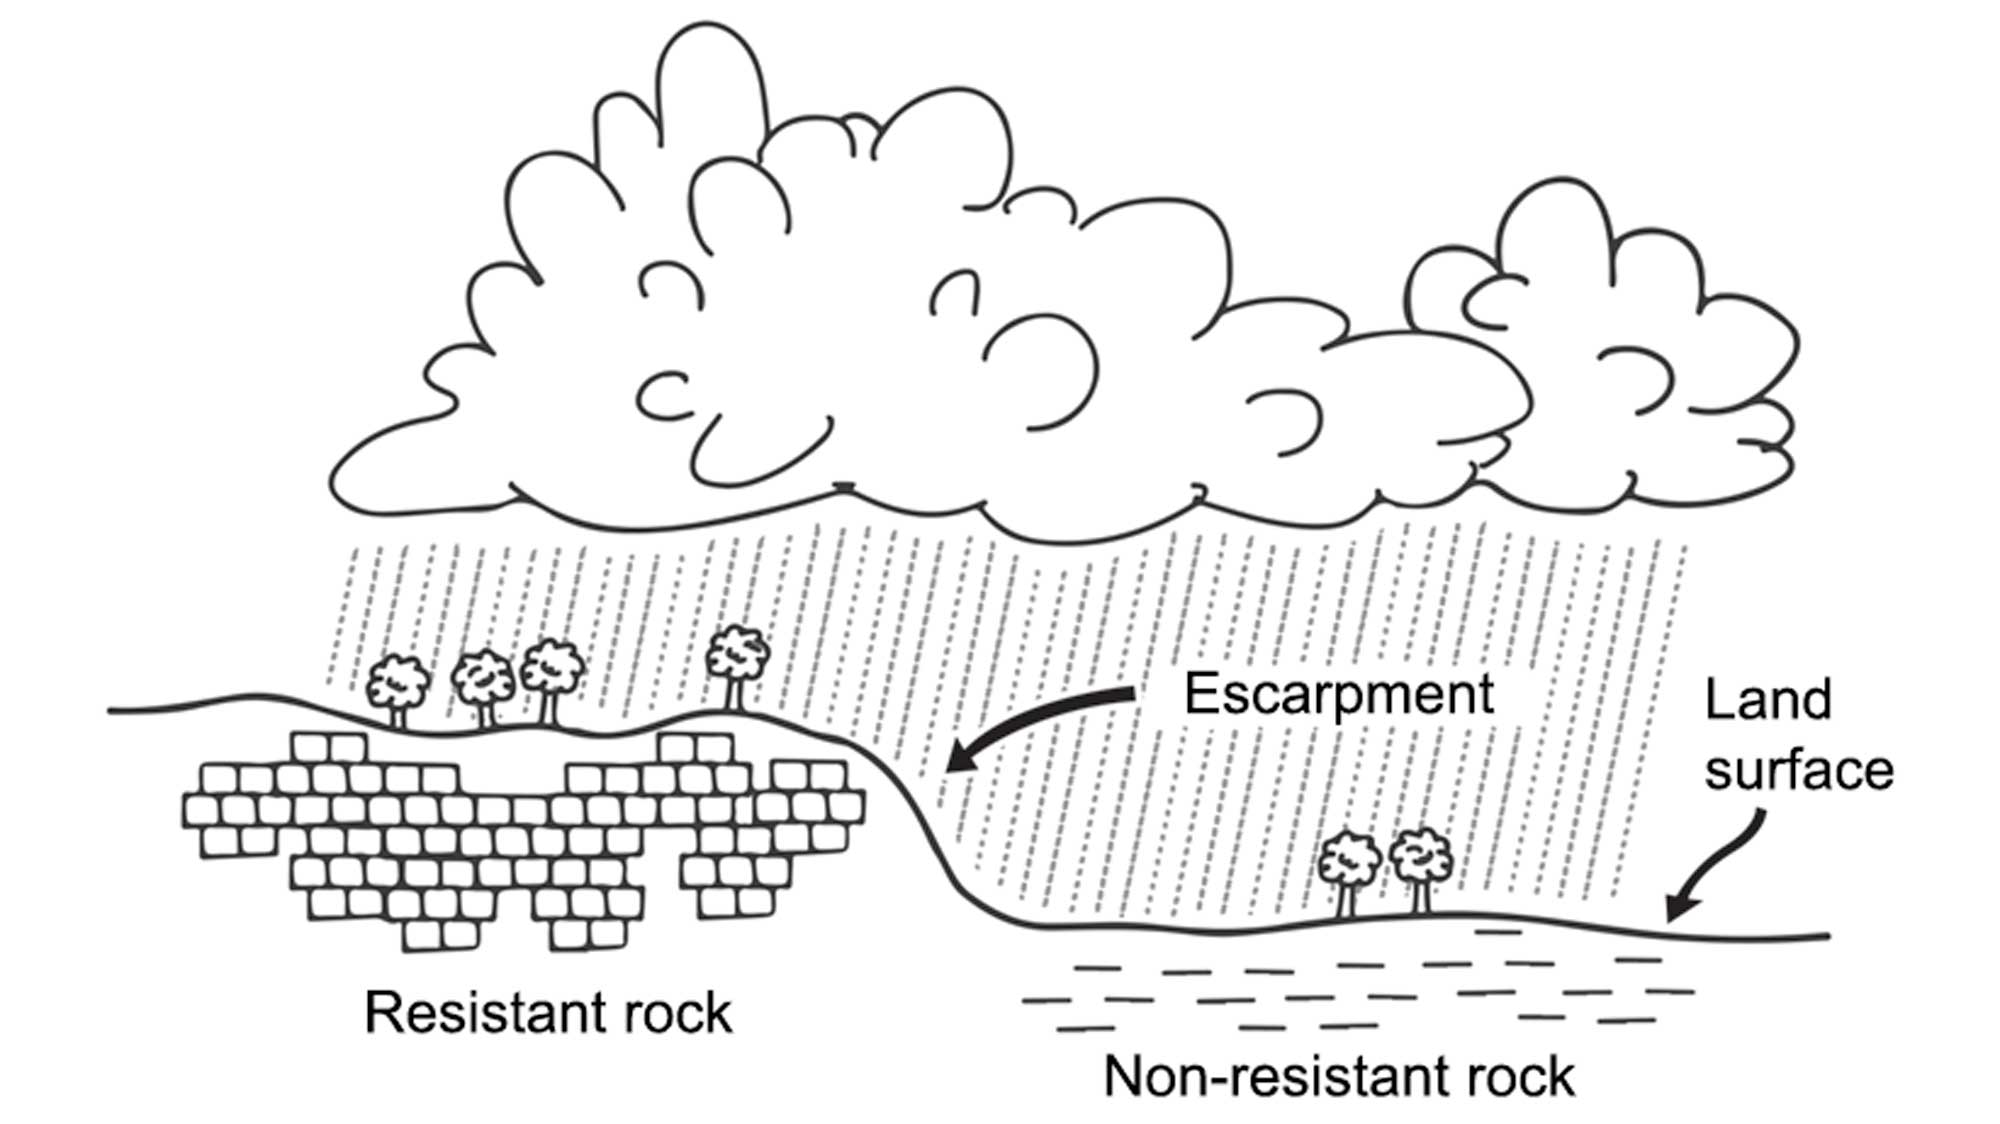 Simple illustration showing the features of an escarpment.